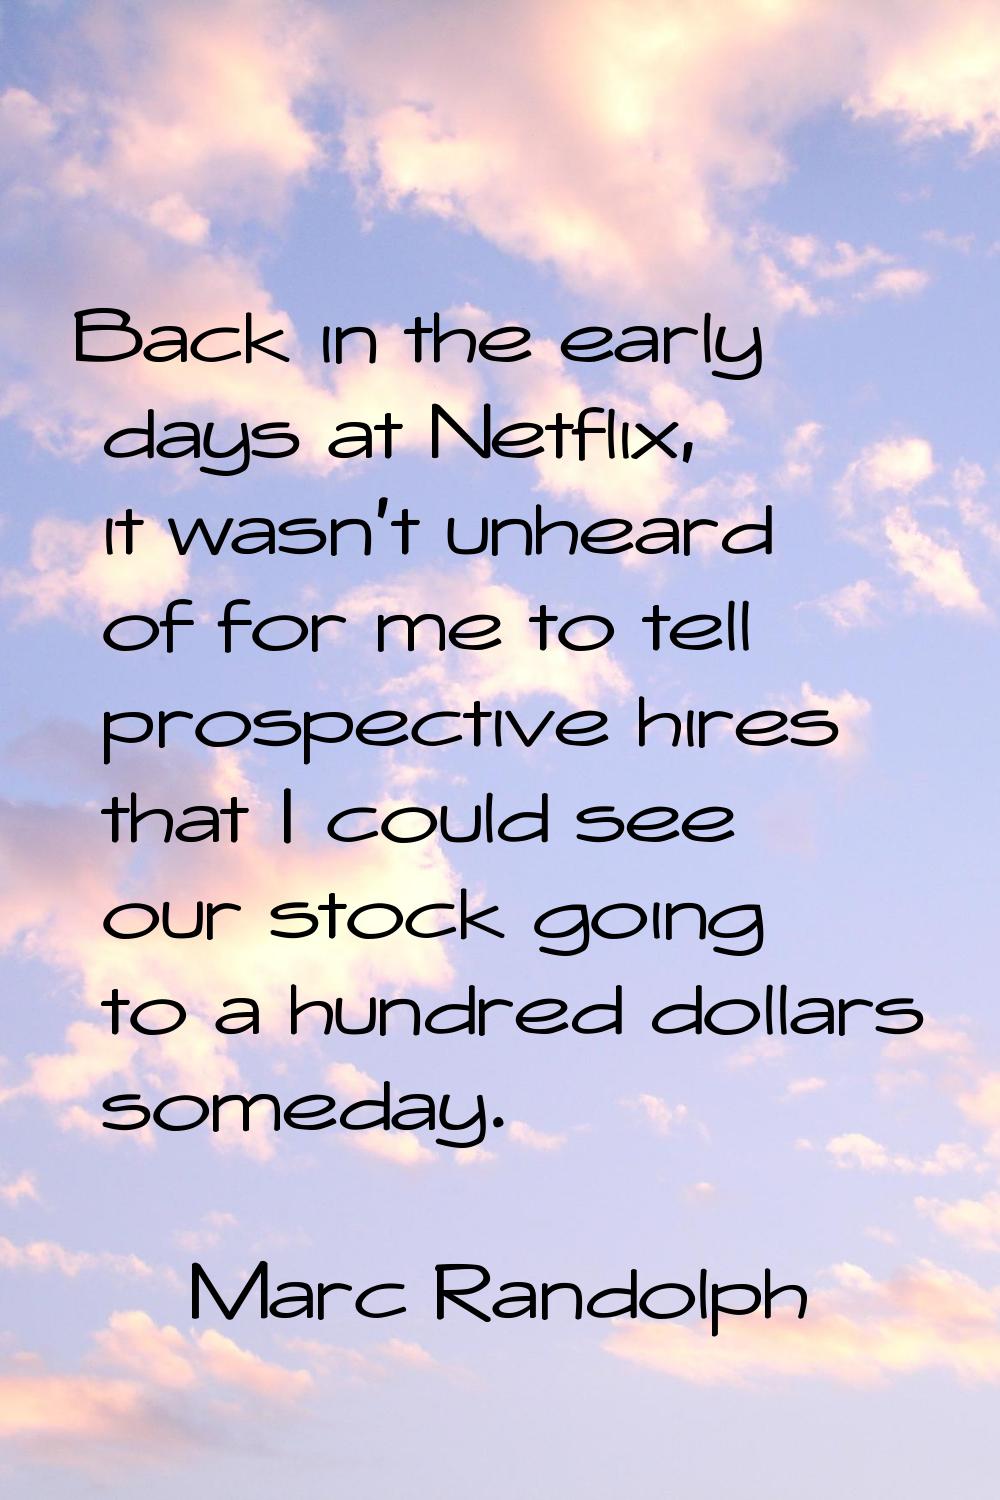 Back in the early days at Netflix, it wasn't unheard of for me to tell prospective hires that I cou